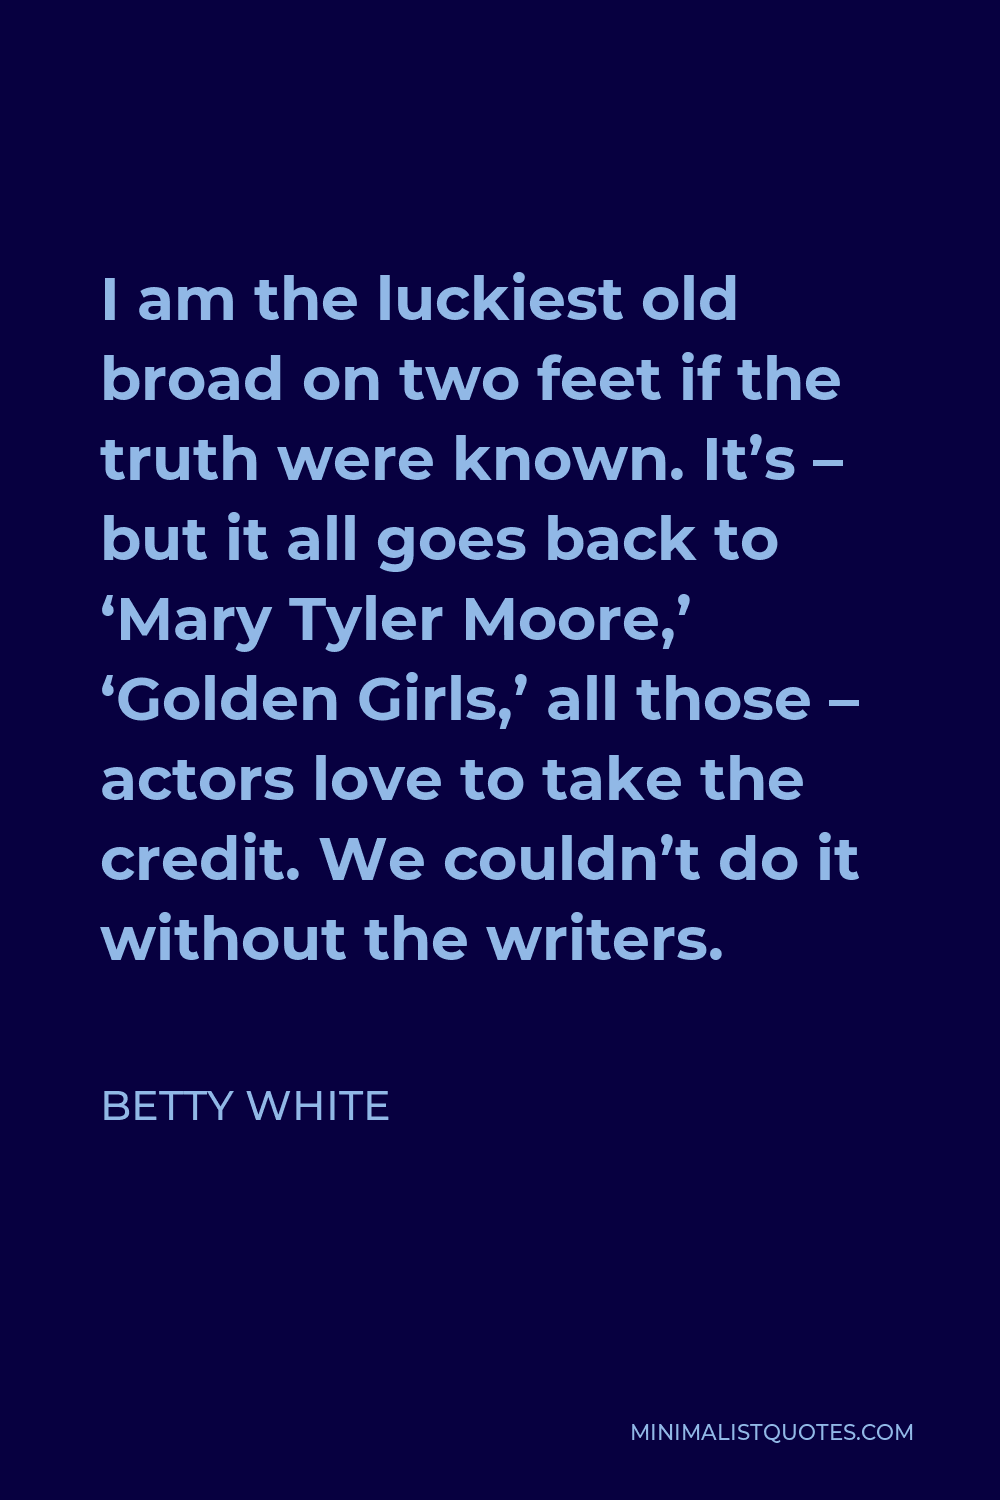 Betty White Quote - I am the luckiest old broad on two feet if the truth were known. It’s – but it all goes back to ‘Mary Tyler Moore,’ ‘Golden Girls,’ all those – actors love to take the credit. We couldn’t do it without the writers.